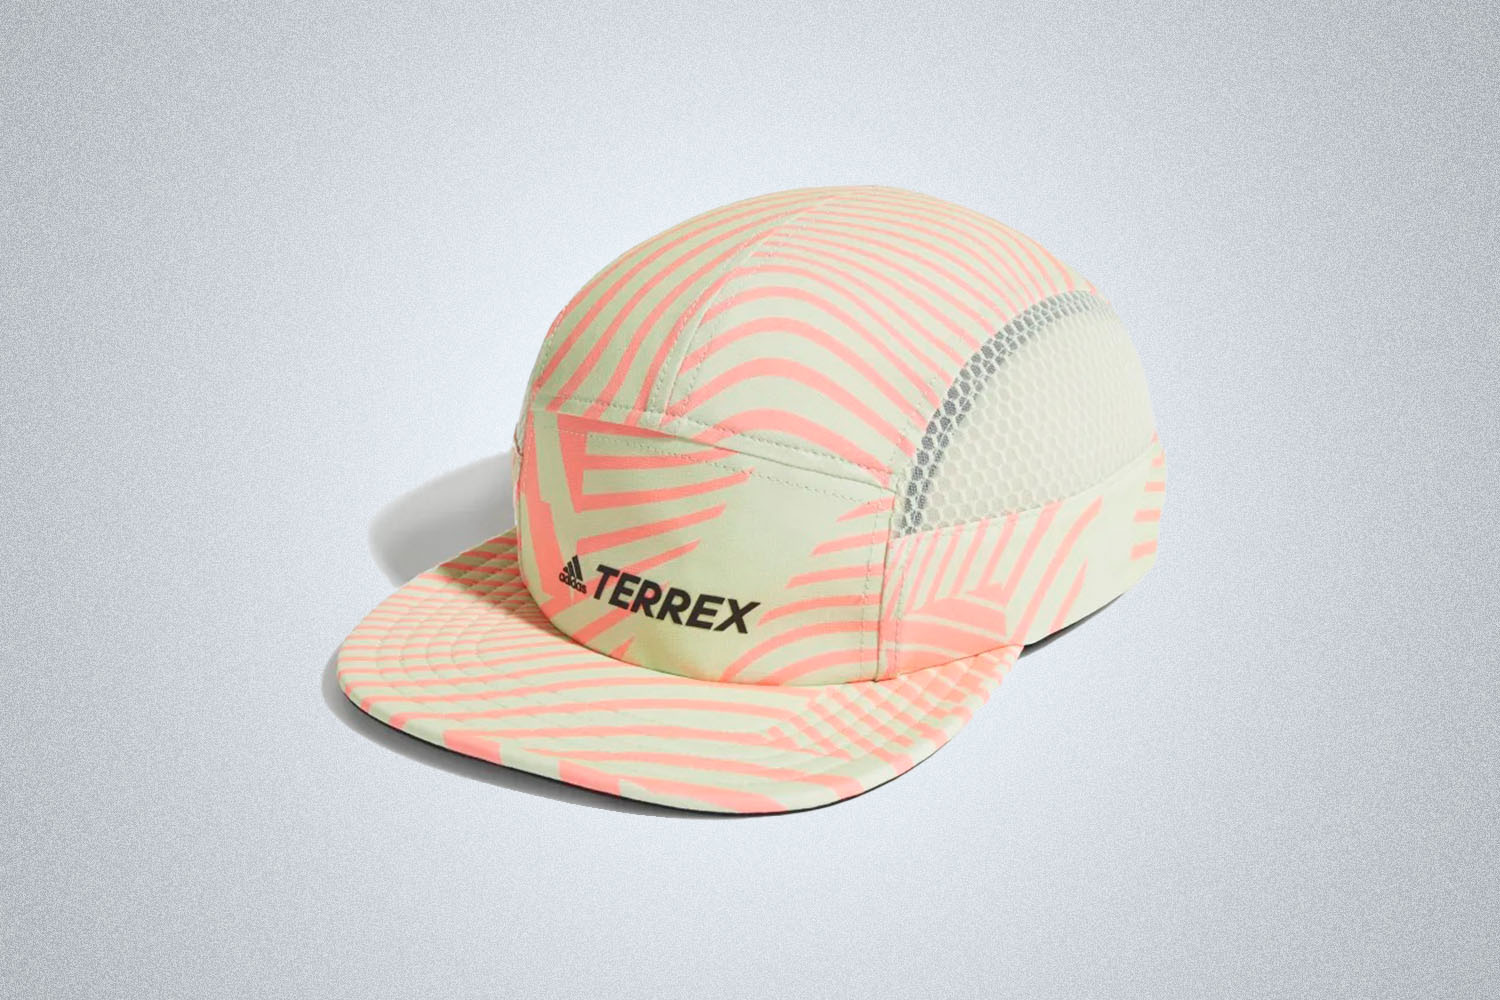 a multi-colored hat with the "terrex" logo across the front from Adidas on a grey background